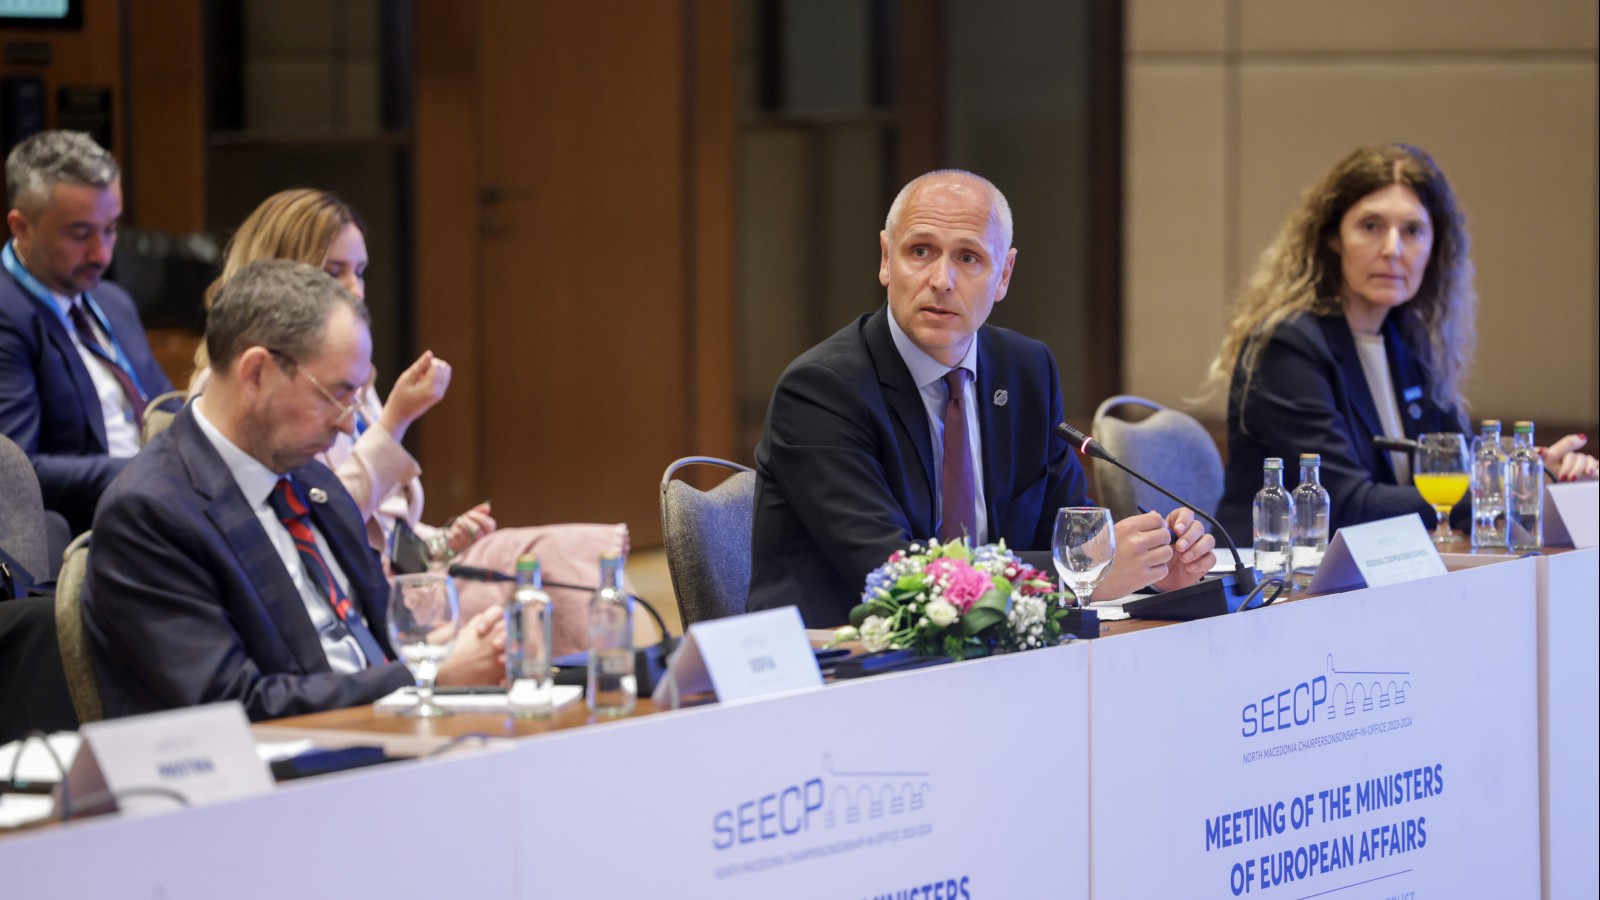 Amer Kapetanovic, Head of RCC’s Political Department at the meeting of SEECP Ministers of European Affairs